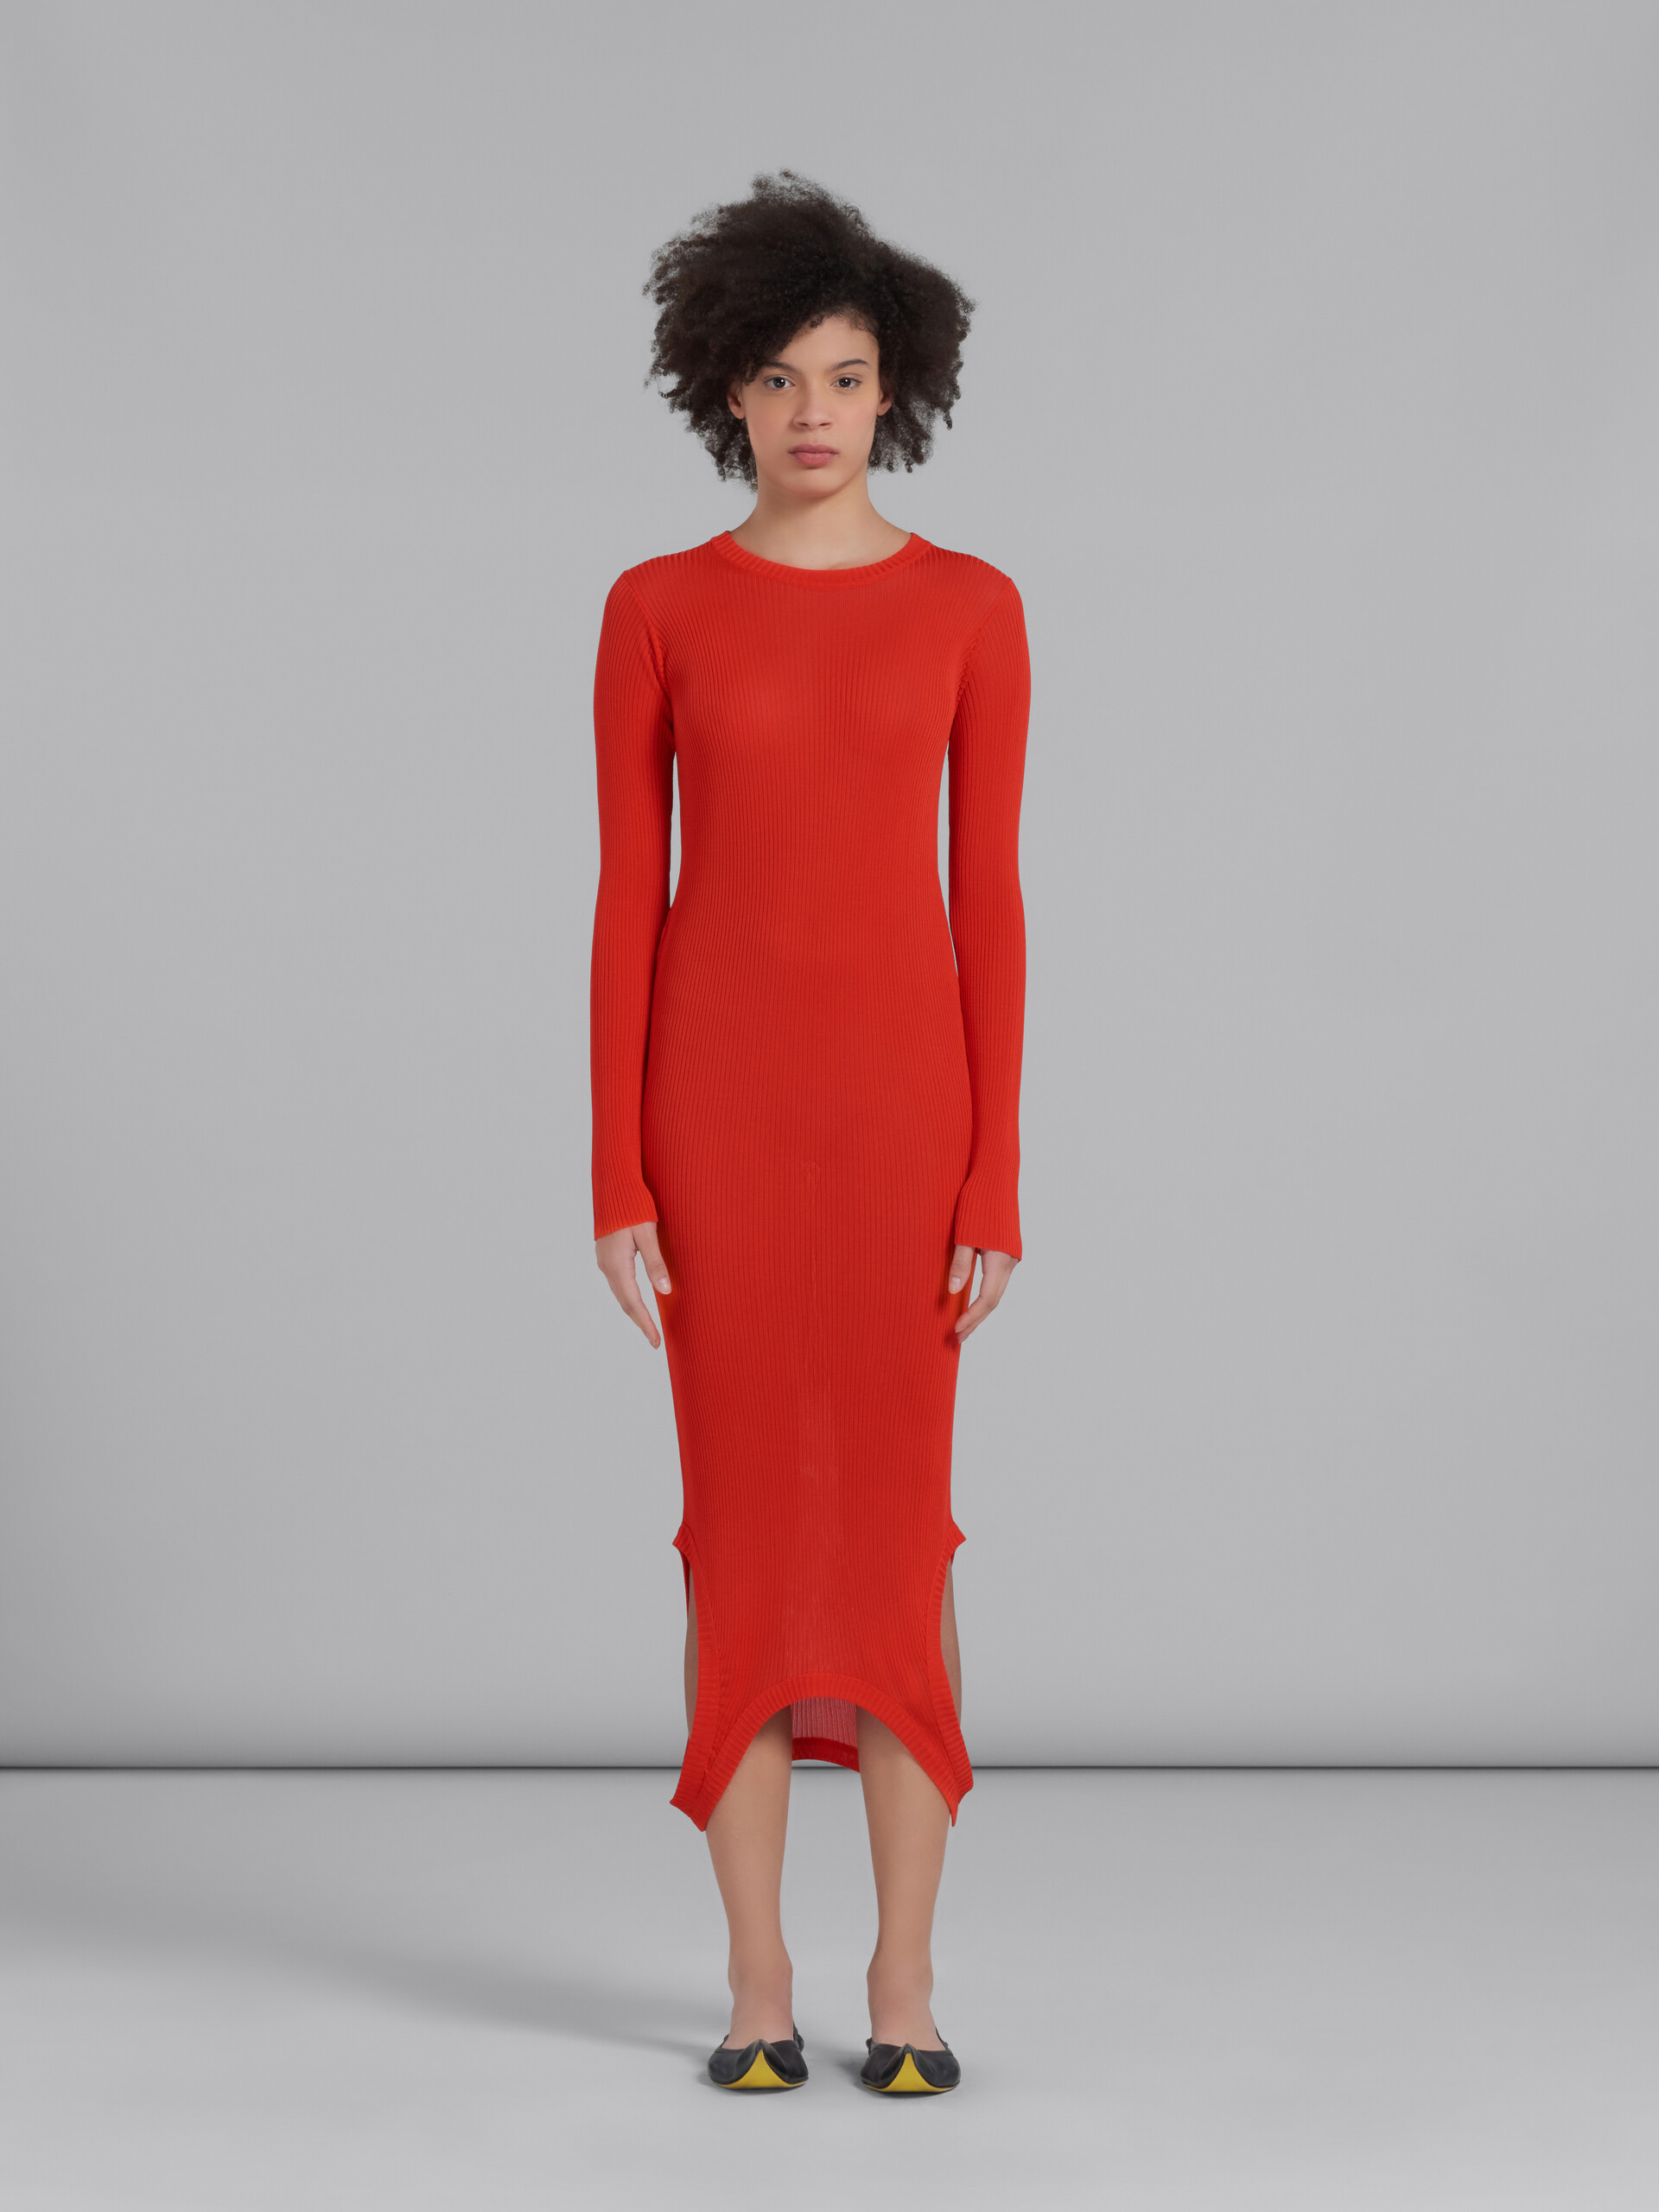 Red ribbed dress with press buttons - Pullovers - Image 2